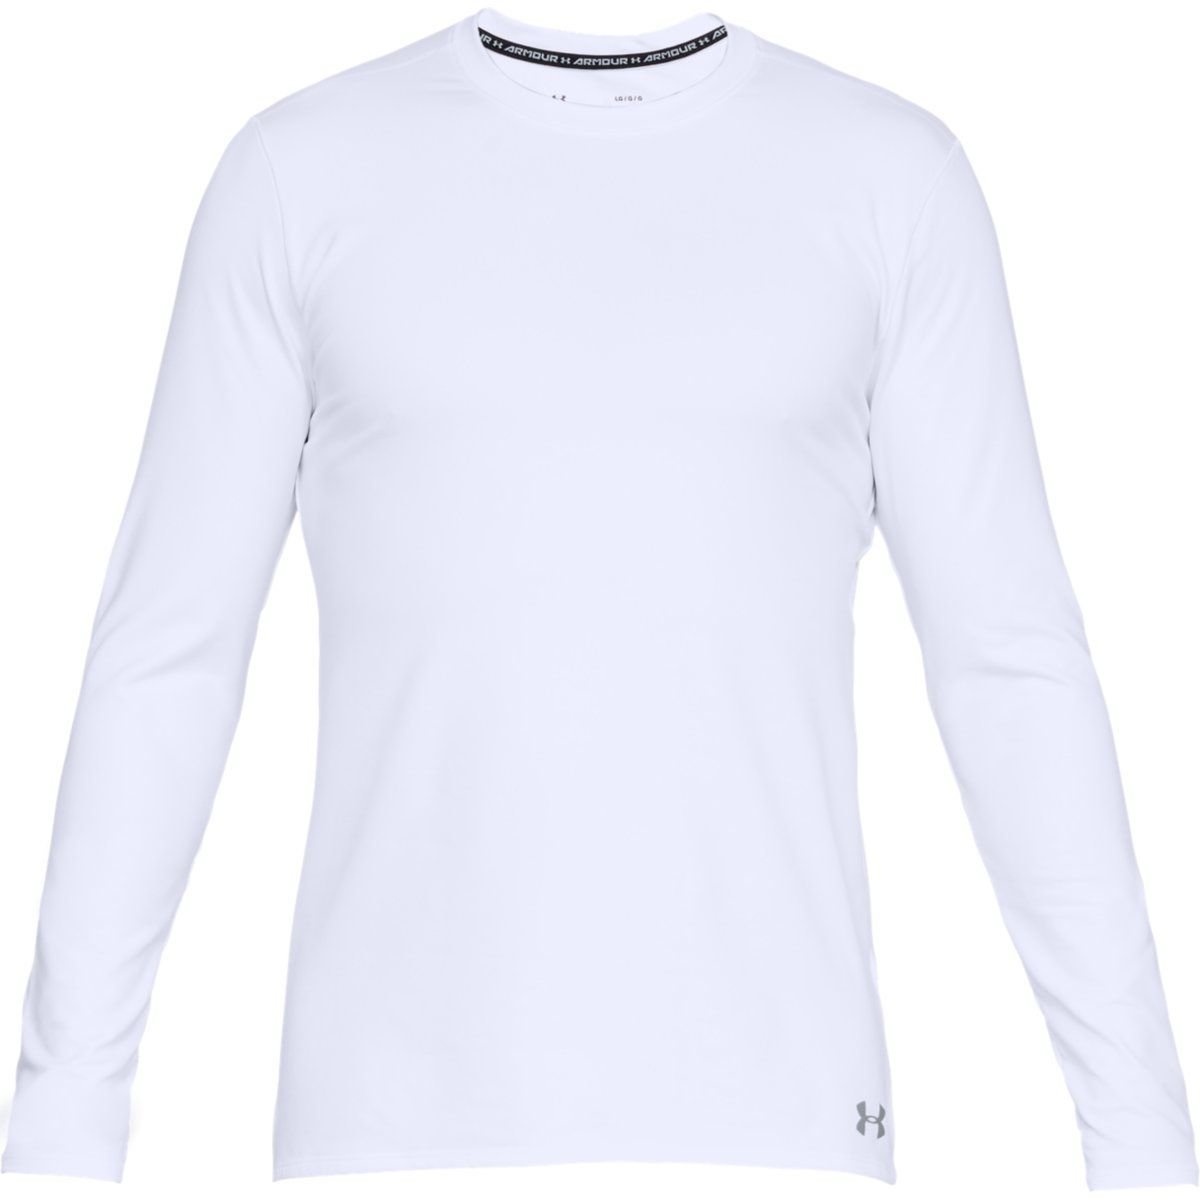 Vêtements thermiques Under Armour Fitted CG Crew Blanc XL